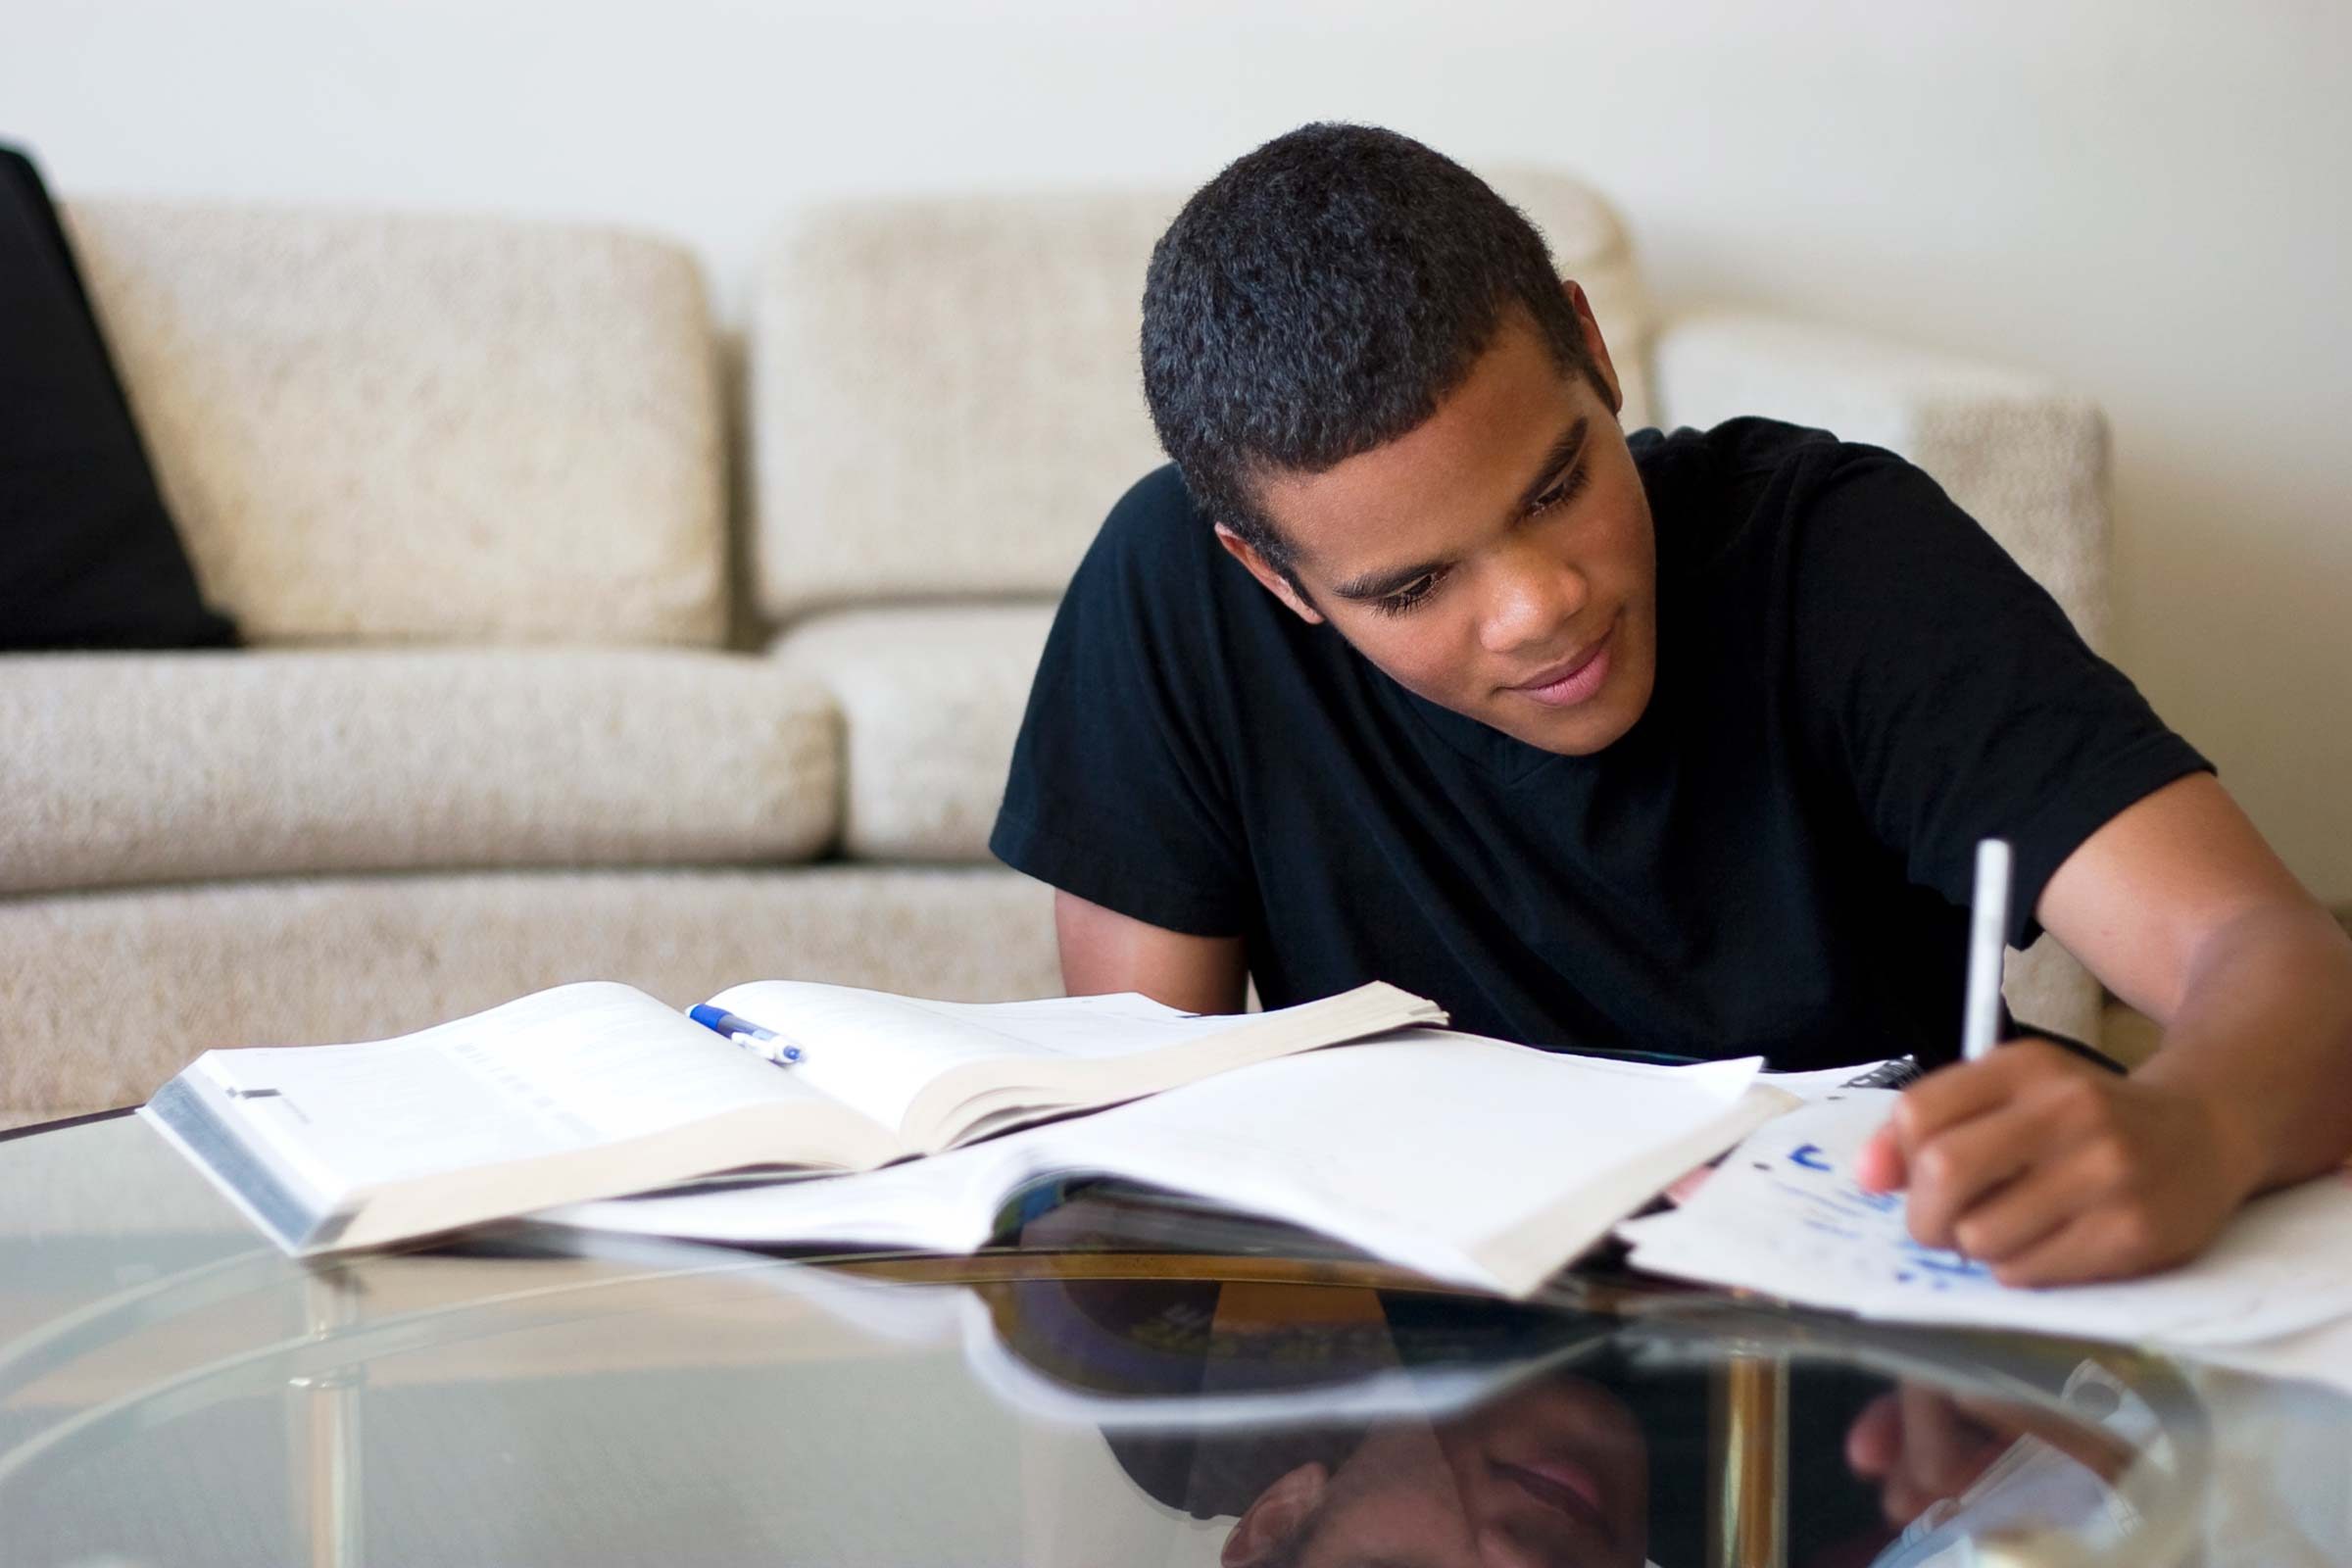 can homework help you prepare for tests